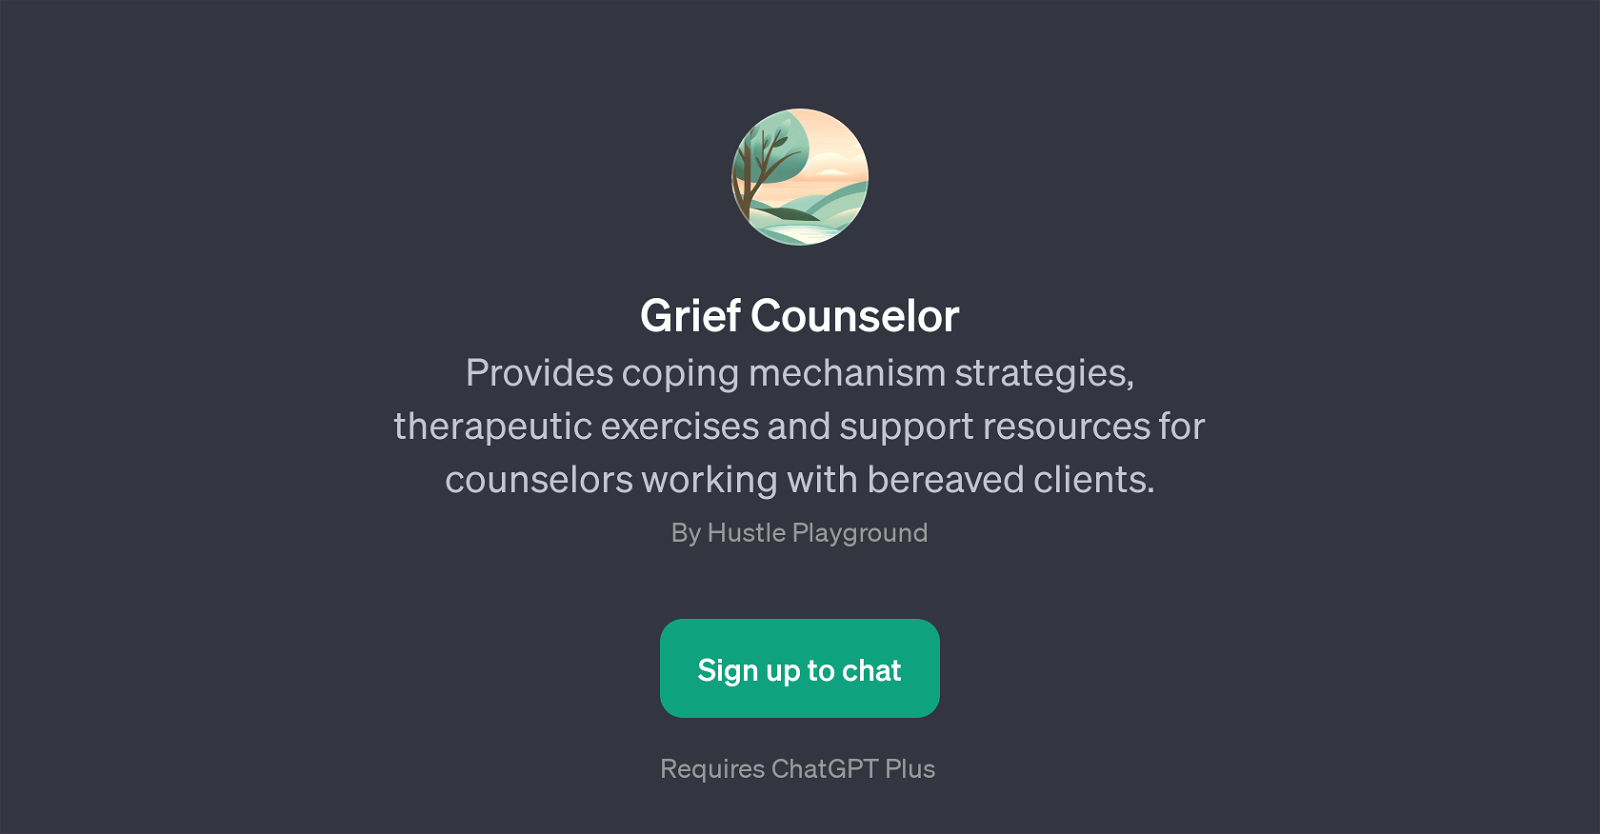 Grief Counselor website